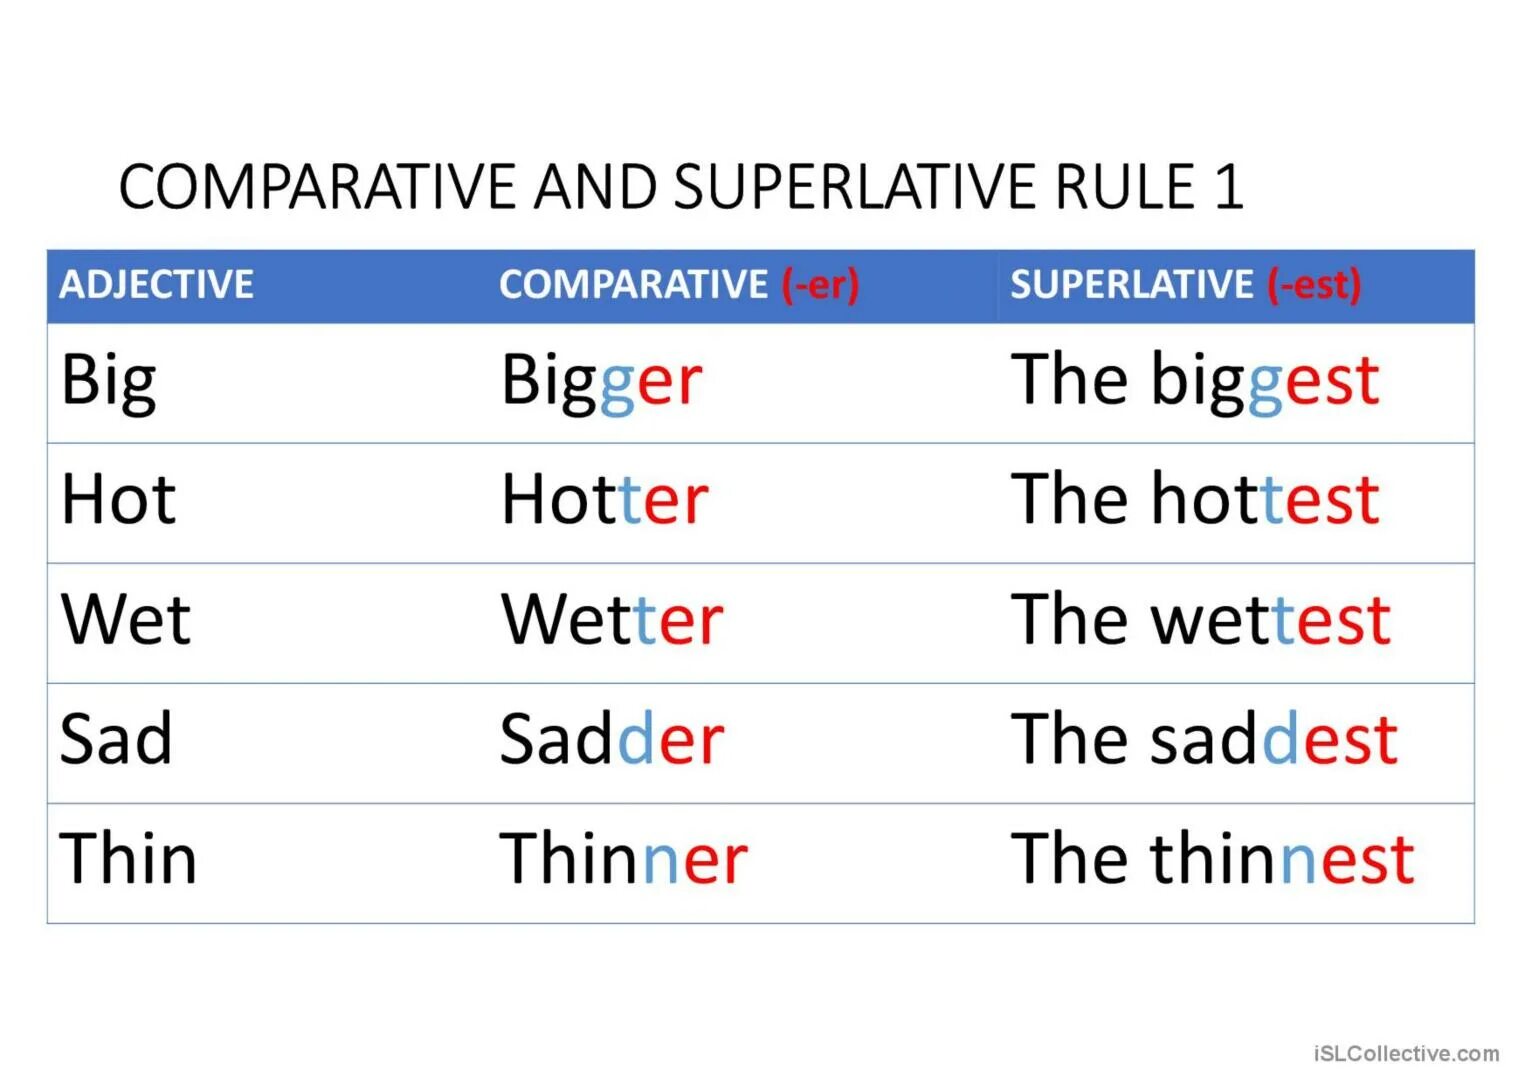 Comparatives and Superlatives правило. Comparative and Superlative adjectives правила. Comparative and Superlative adjectives правило. Superlative adjectives правило. Adjectives rules